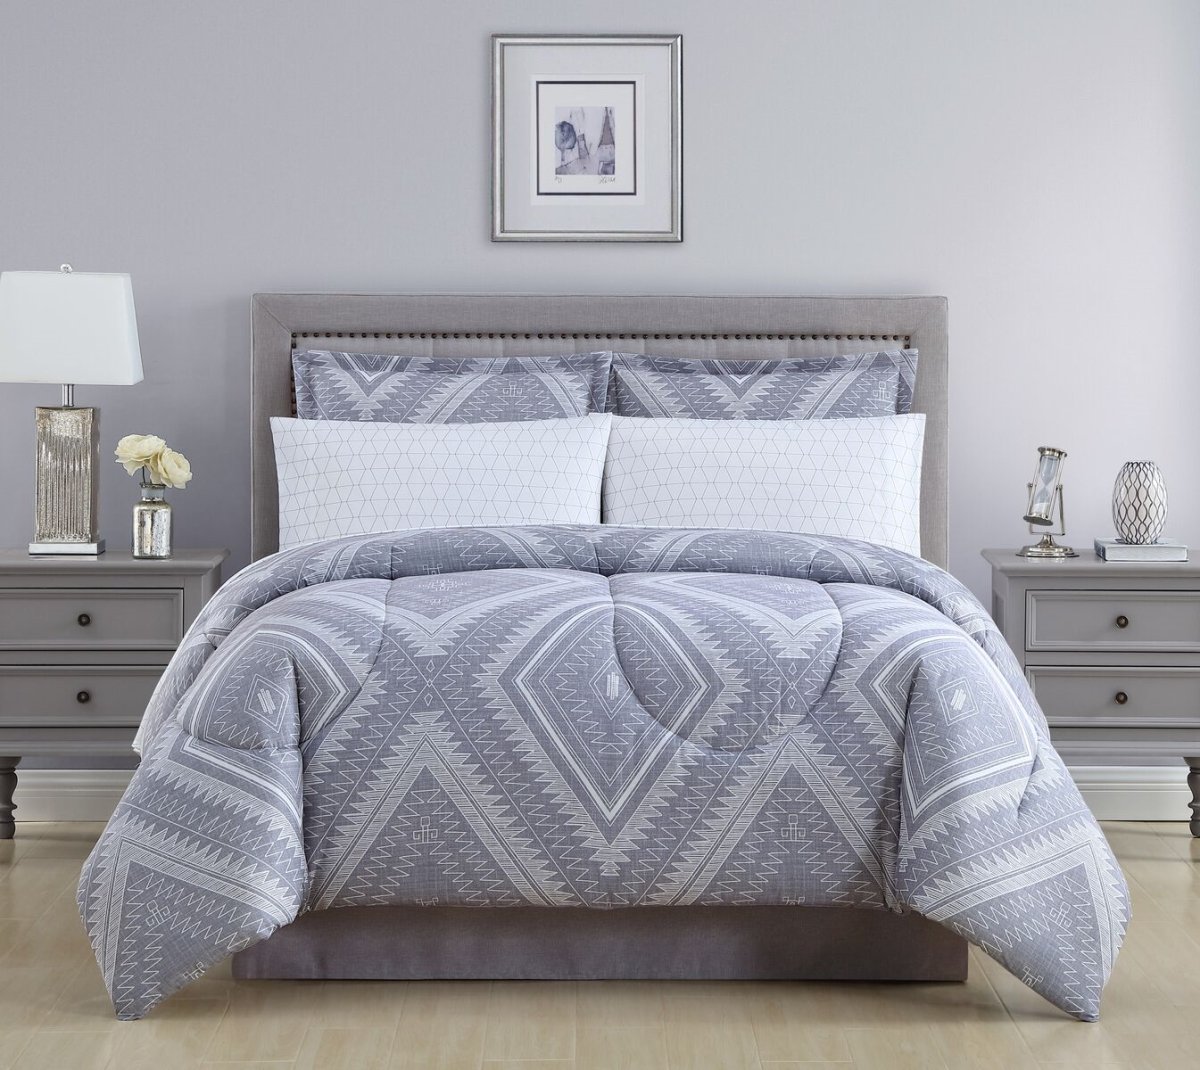 19331803bb-mul Aileen Bed In A Bag Comforter Set, Grey - Queen Size, 8 Piece